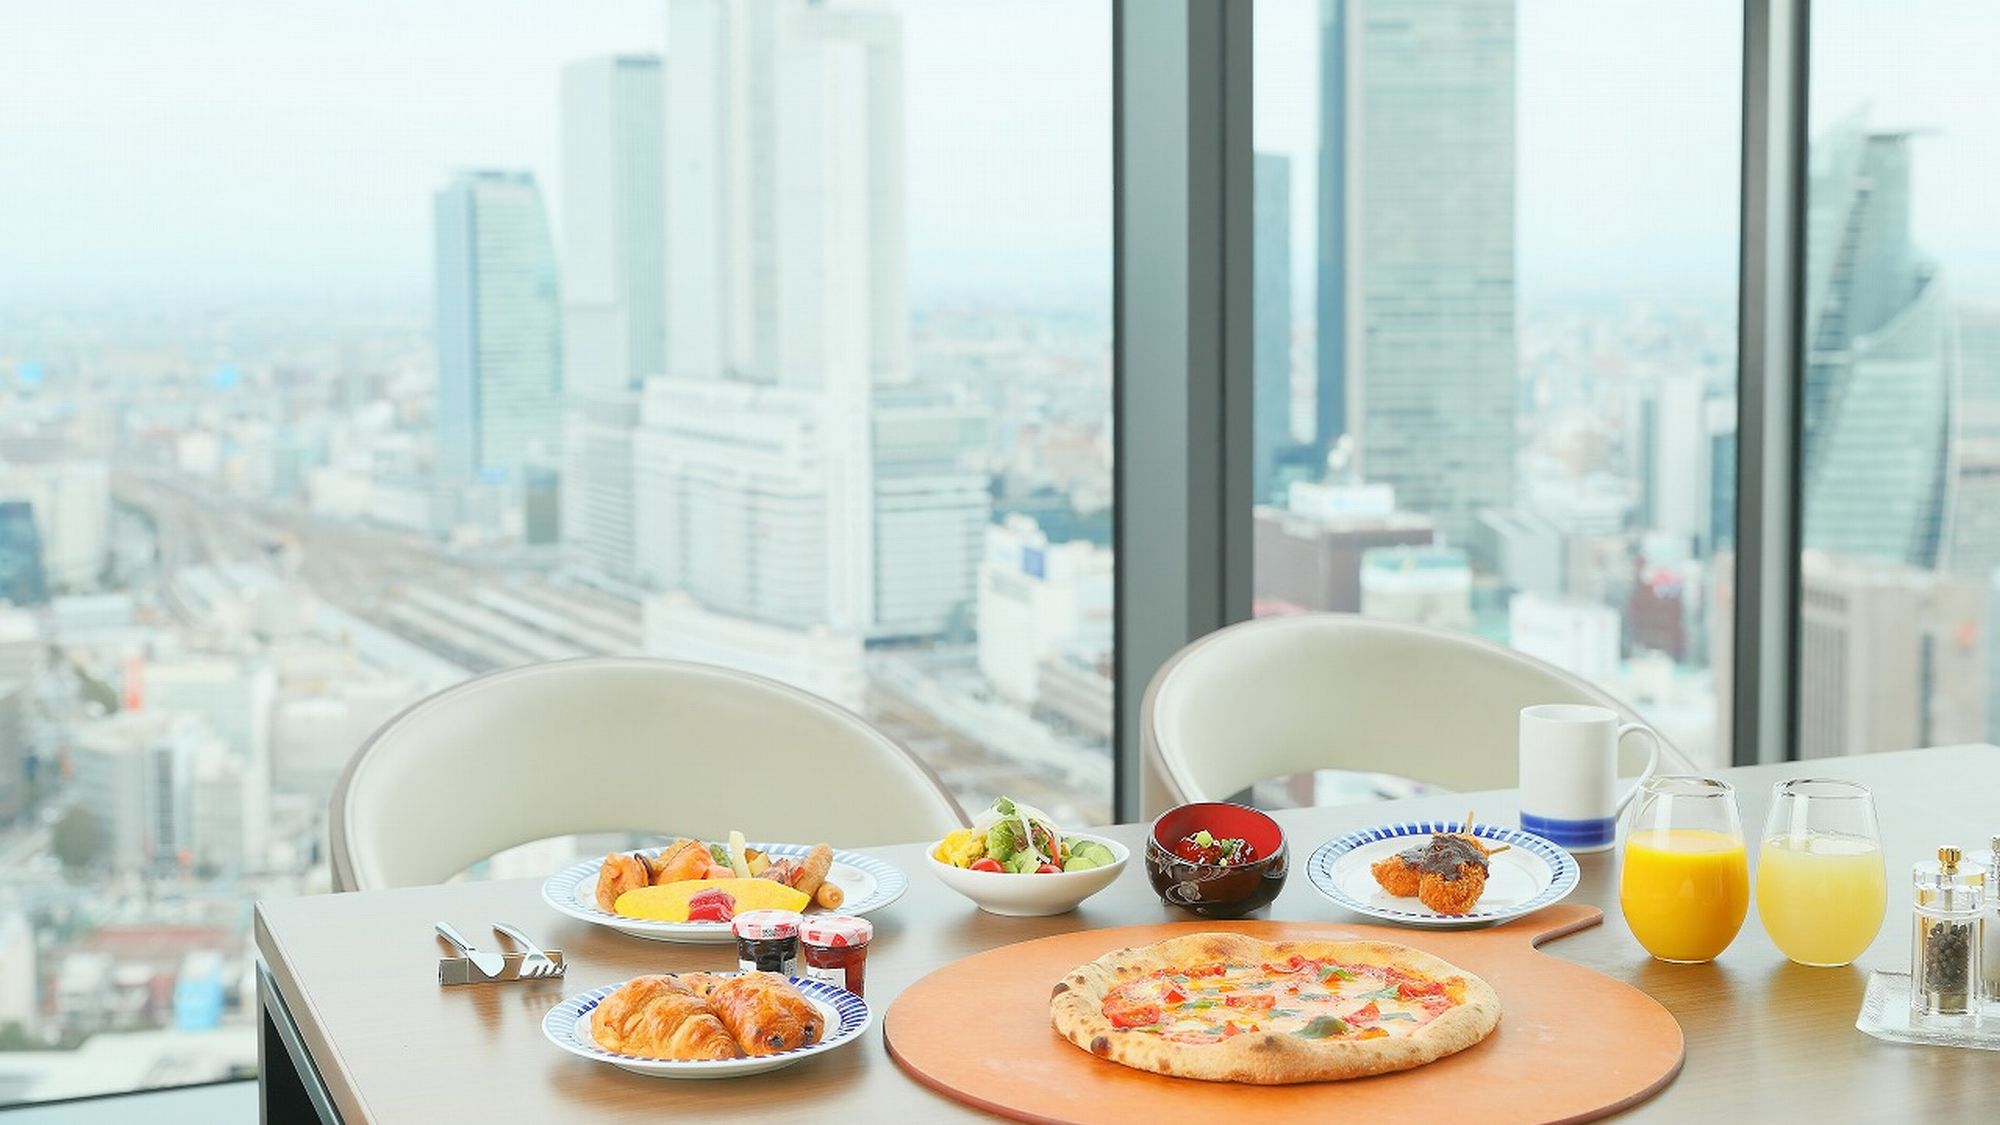 Sky Dining 天空　眺望と朝食を同時に味わえる「眺食」